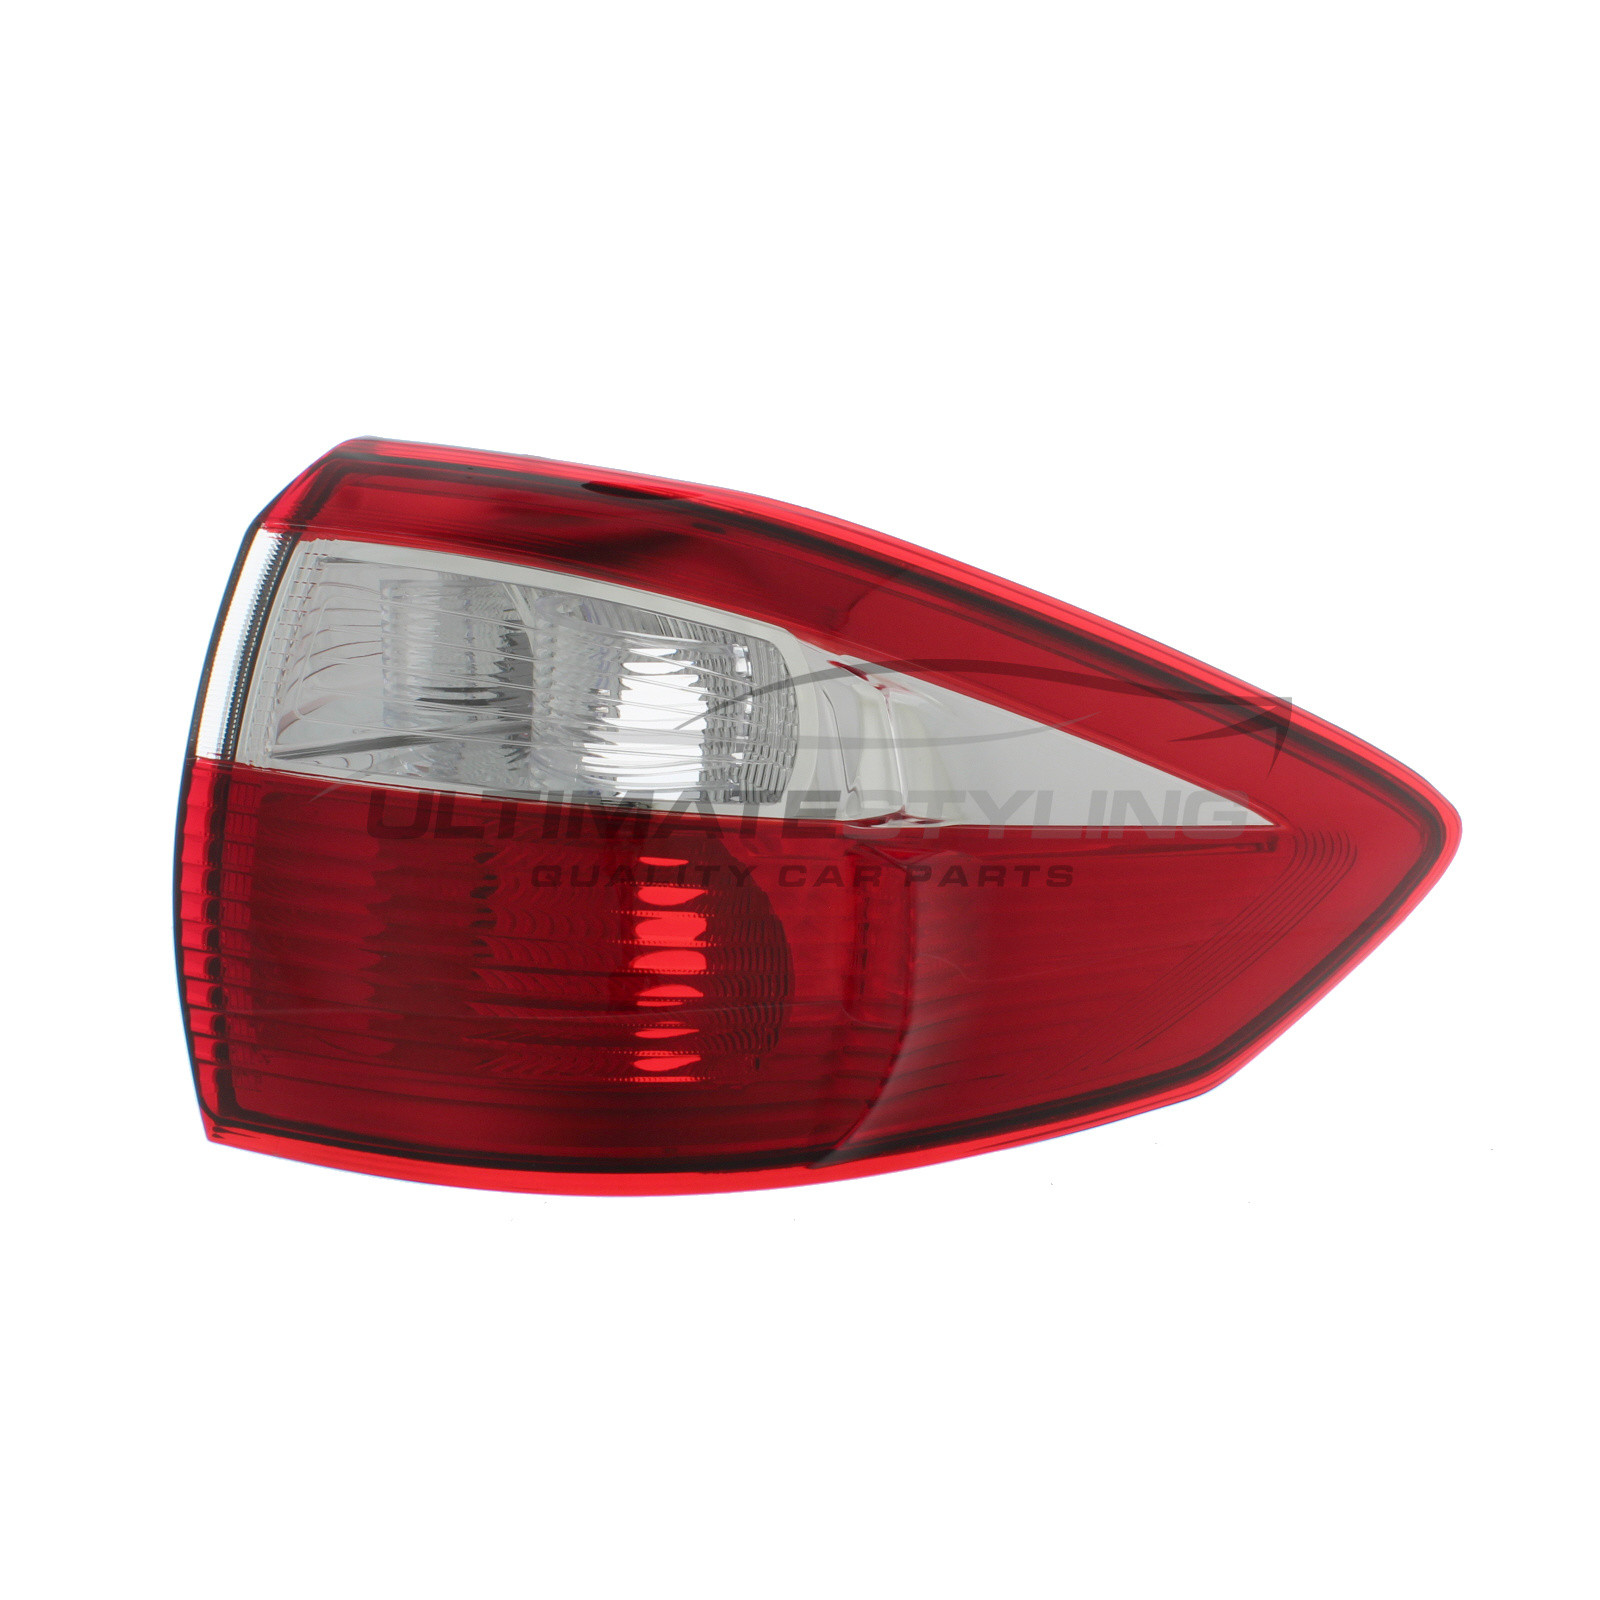 Rear Light / Tail Light for Ford C-MAX